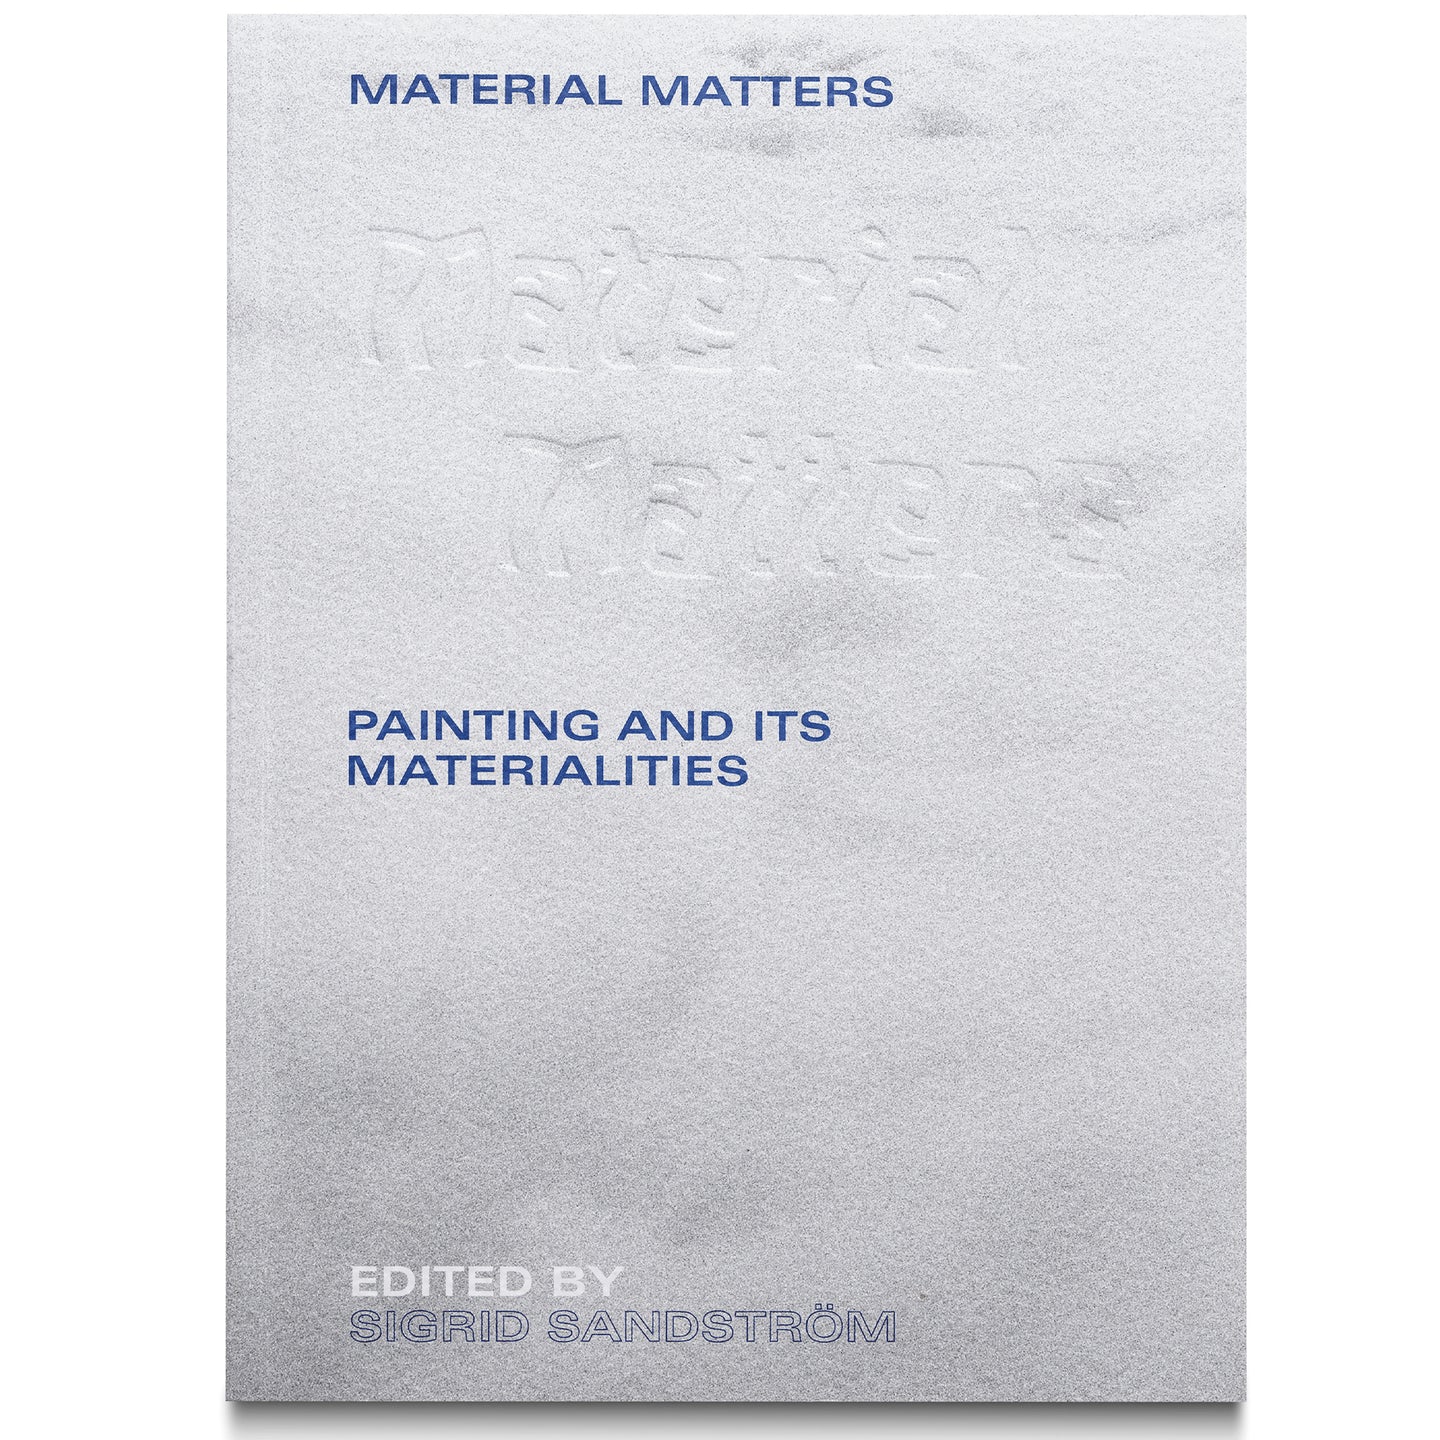 MATERIAL MATTERS: PAINTING AND ITS MATERIALITIES